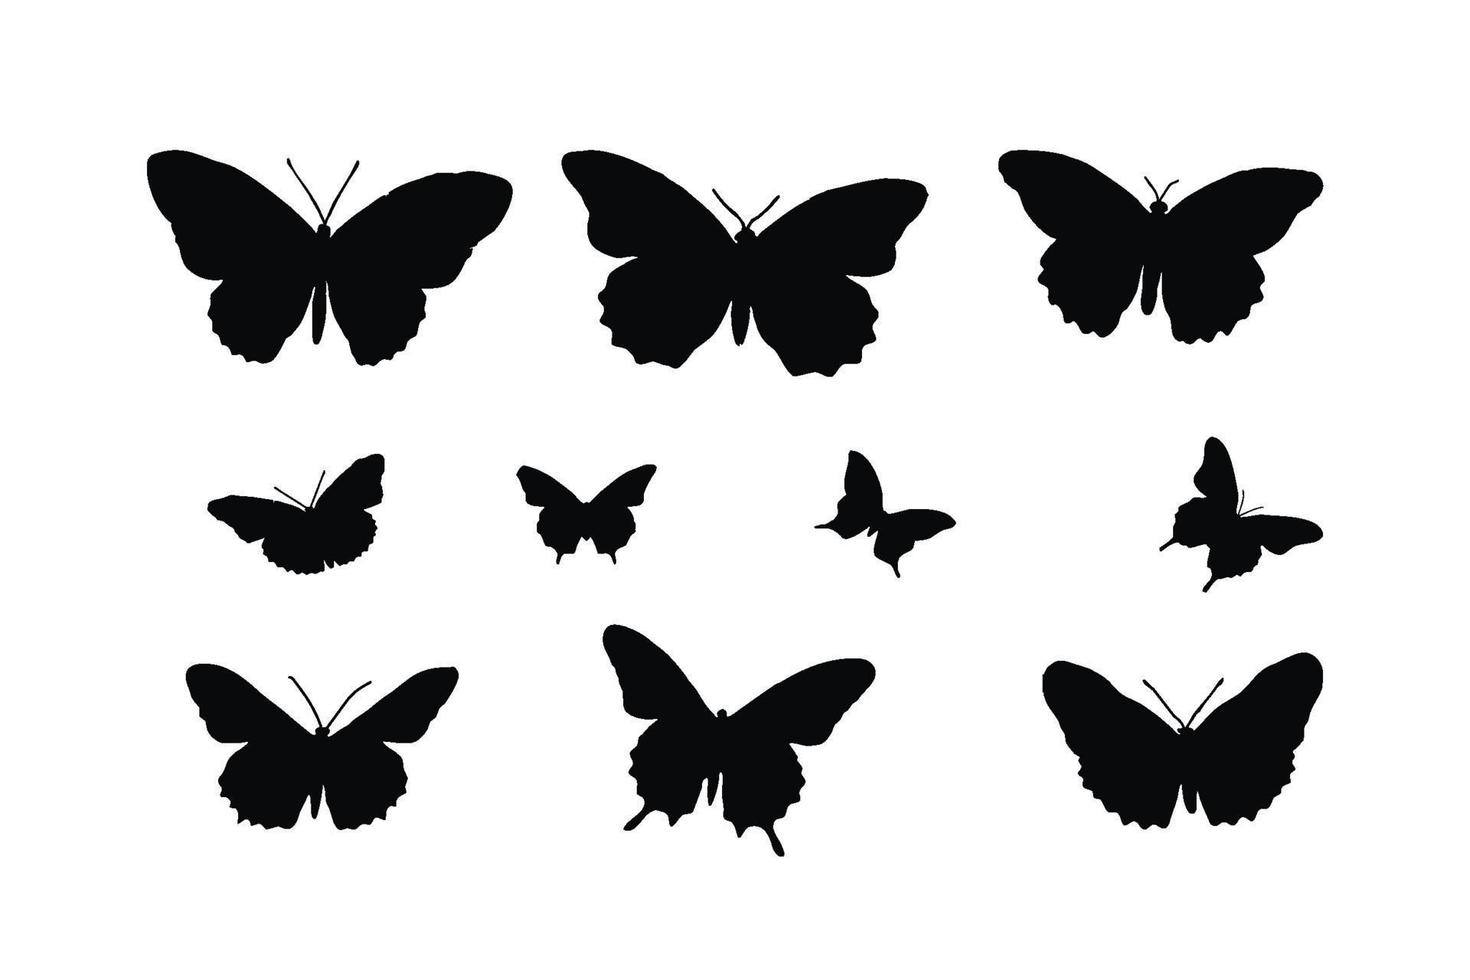 Cute butterflies silhouette set vector on a white background. Butterfly icons and silhouette collection. Beautiful monarch butterfly flying in different positions. Butterfly silhouette set design.